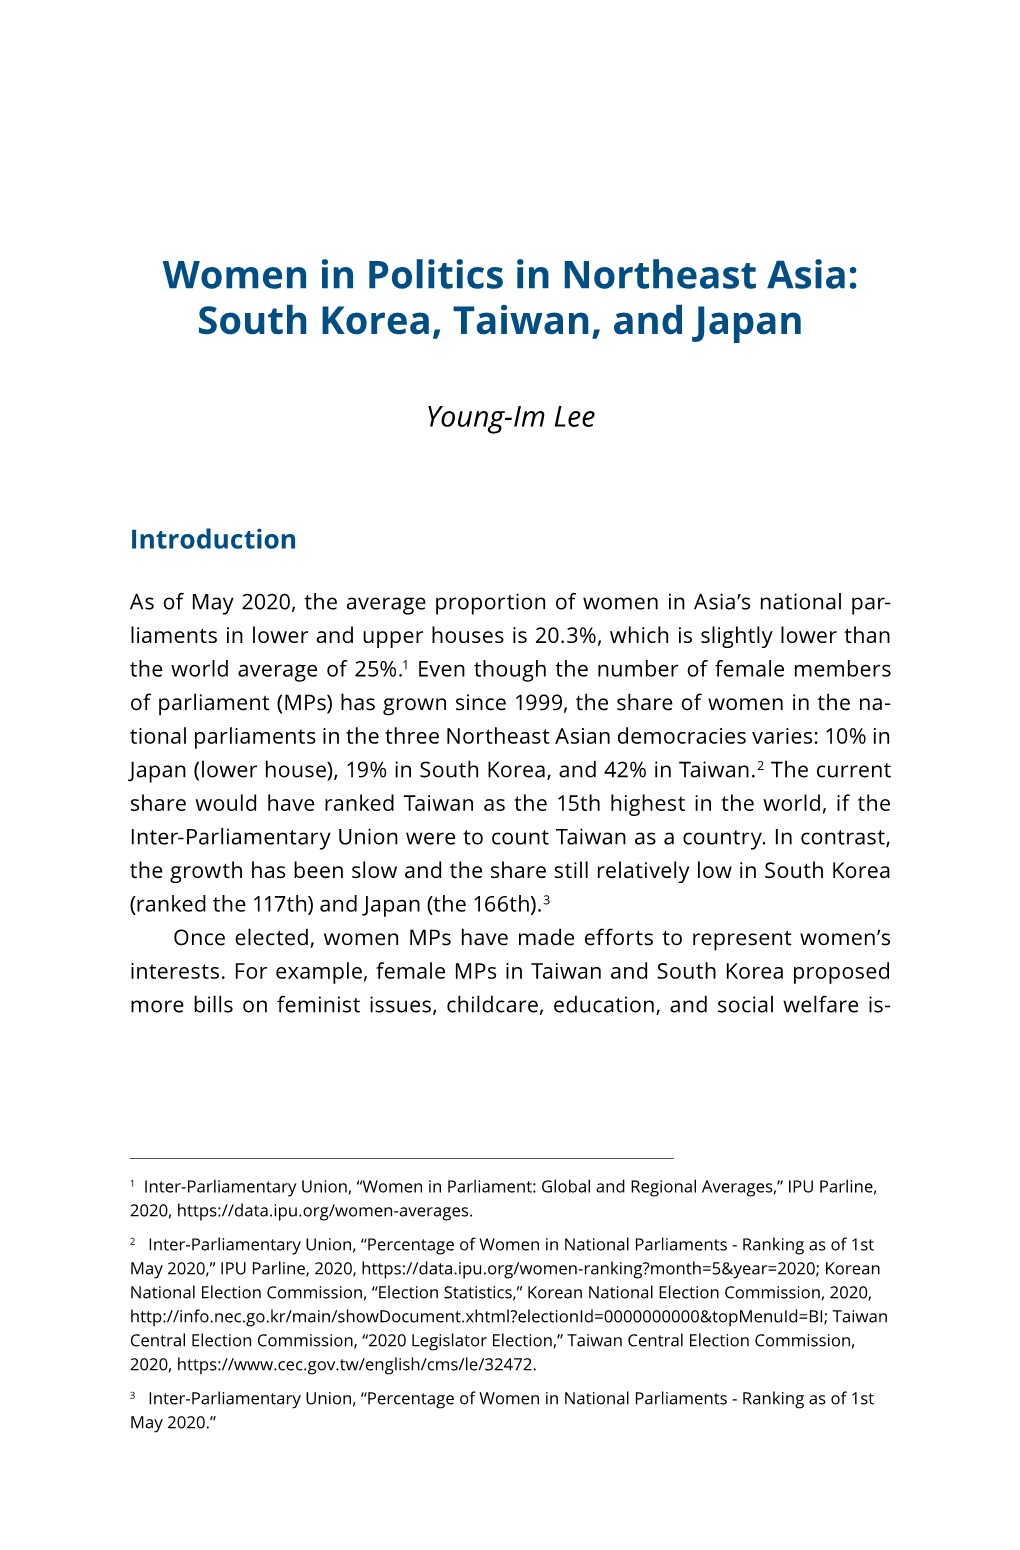 Women in Politics in Northeast Asia: South Korea, Taiwan, and Japan